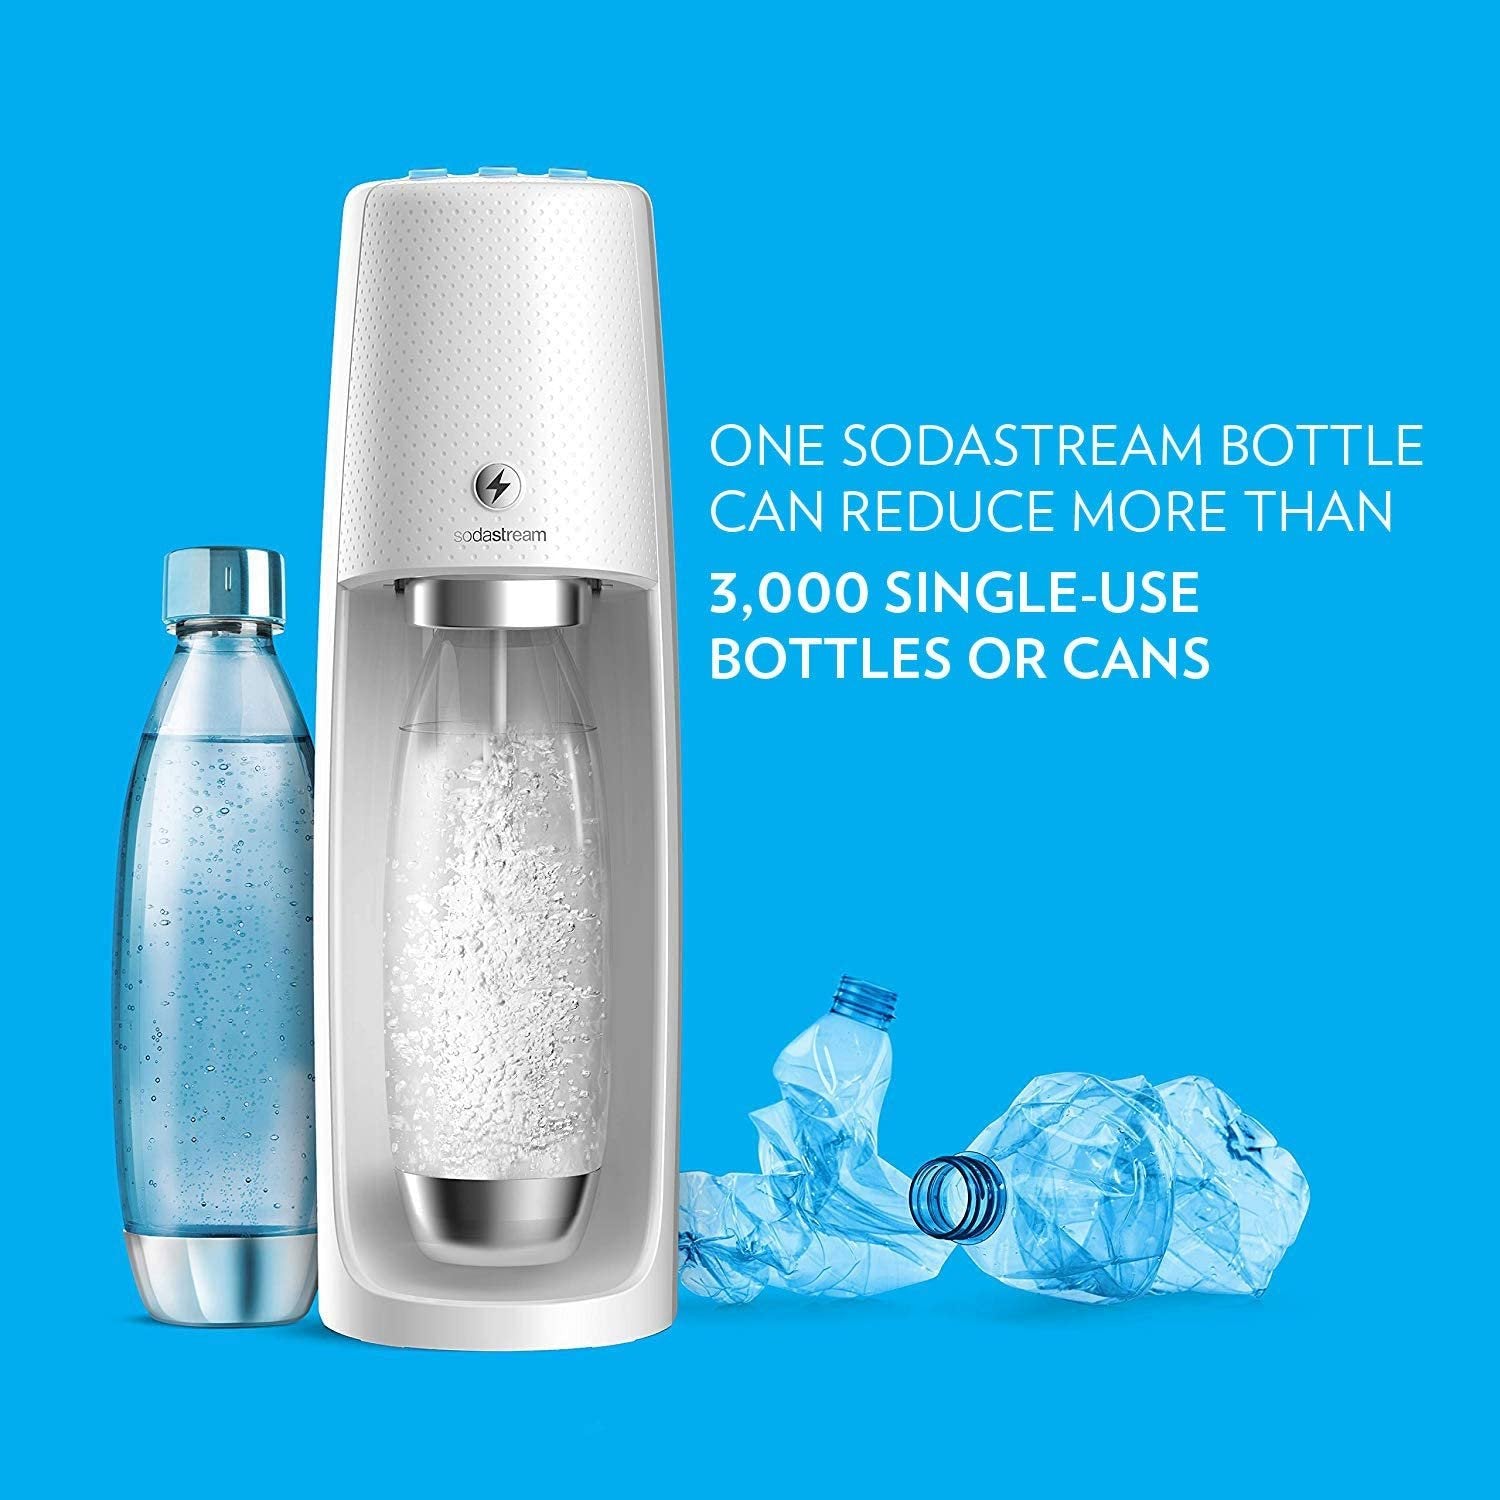 SodaStream Fizzi One Touch Sparkling Water Maker (Black) with CO2 and BPA free Bottle